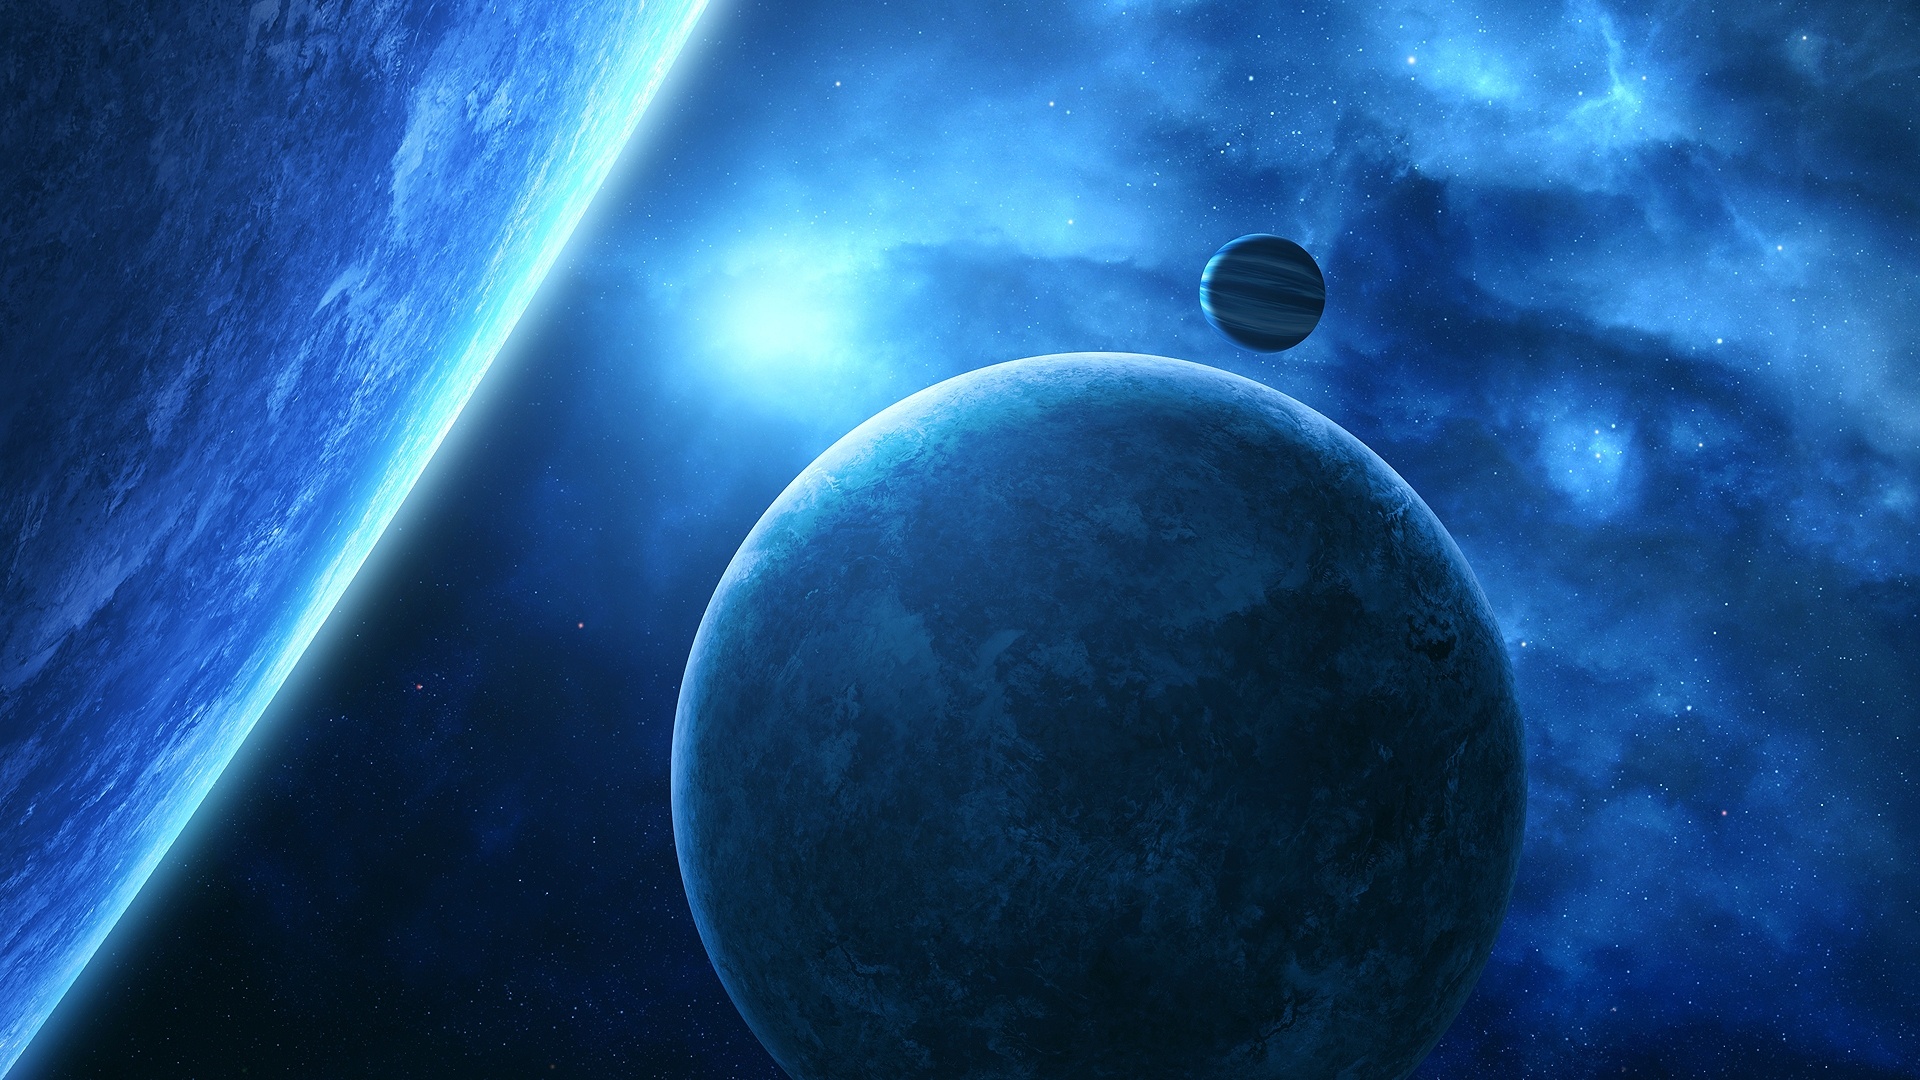 space wallpaper hd 1920x1080,outer space,atmosphere,astronomical object,planet,universe